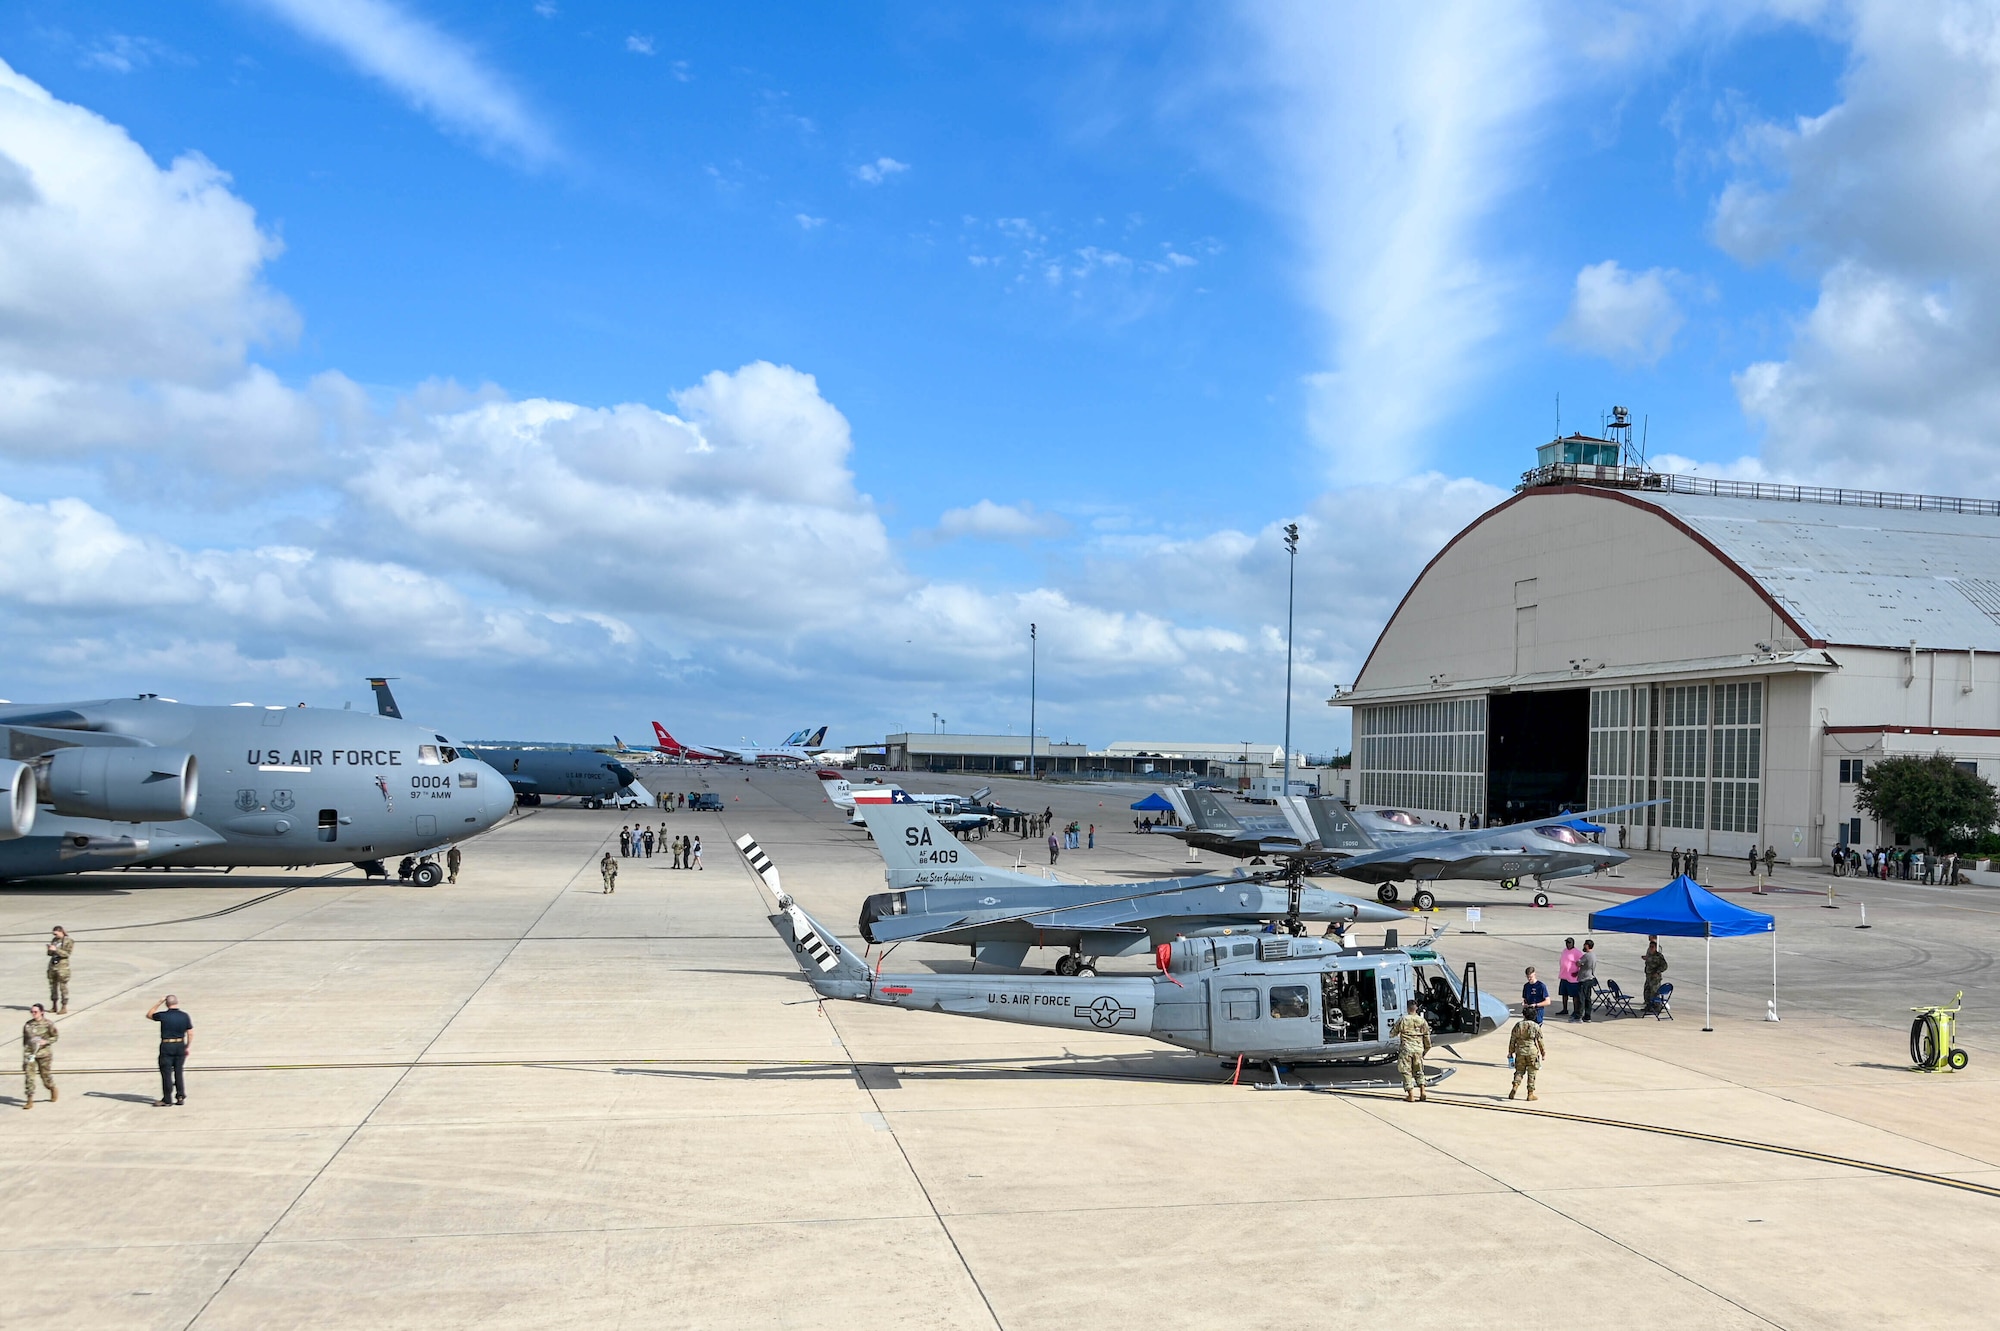 Airmen, Guardians, and community members view different aircraft at the Torch Athena Fly-In in San Antonio, Texas, on Sept. 21, 2023. The women’s fly-in aimed to educate, inspire and influence the next generation of aviators. (U.S. Air Force photo by Airman 1st Class Heidi Bucins)